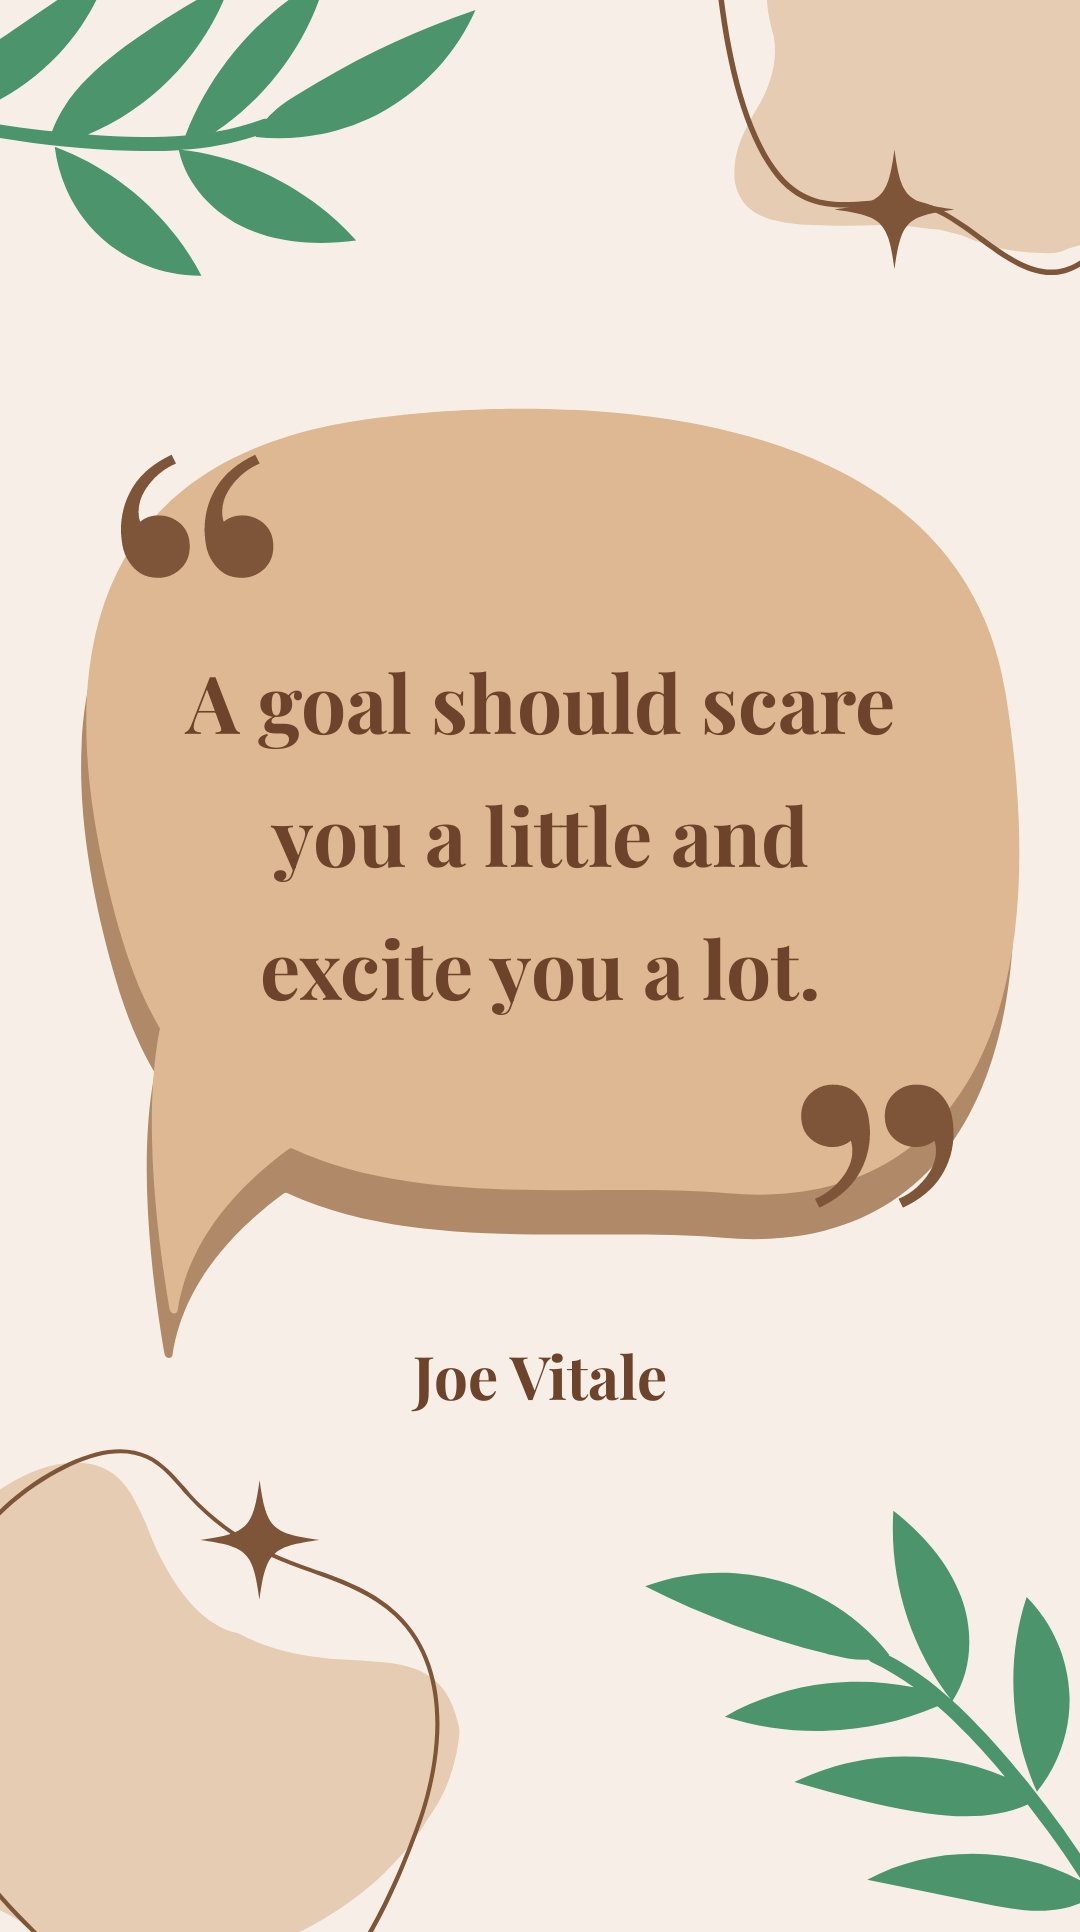 Joe Vitale - “A goal should scare you a little and excite you a lot."